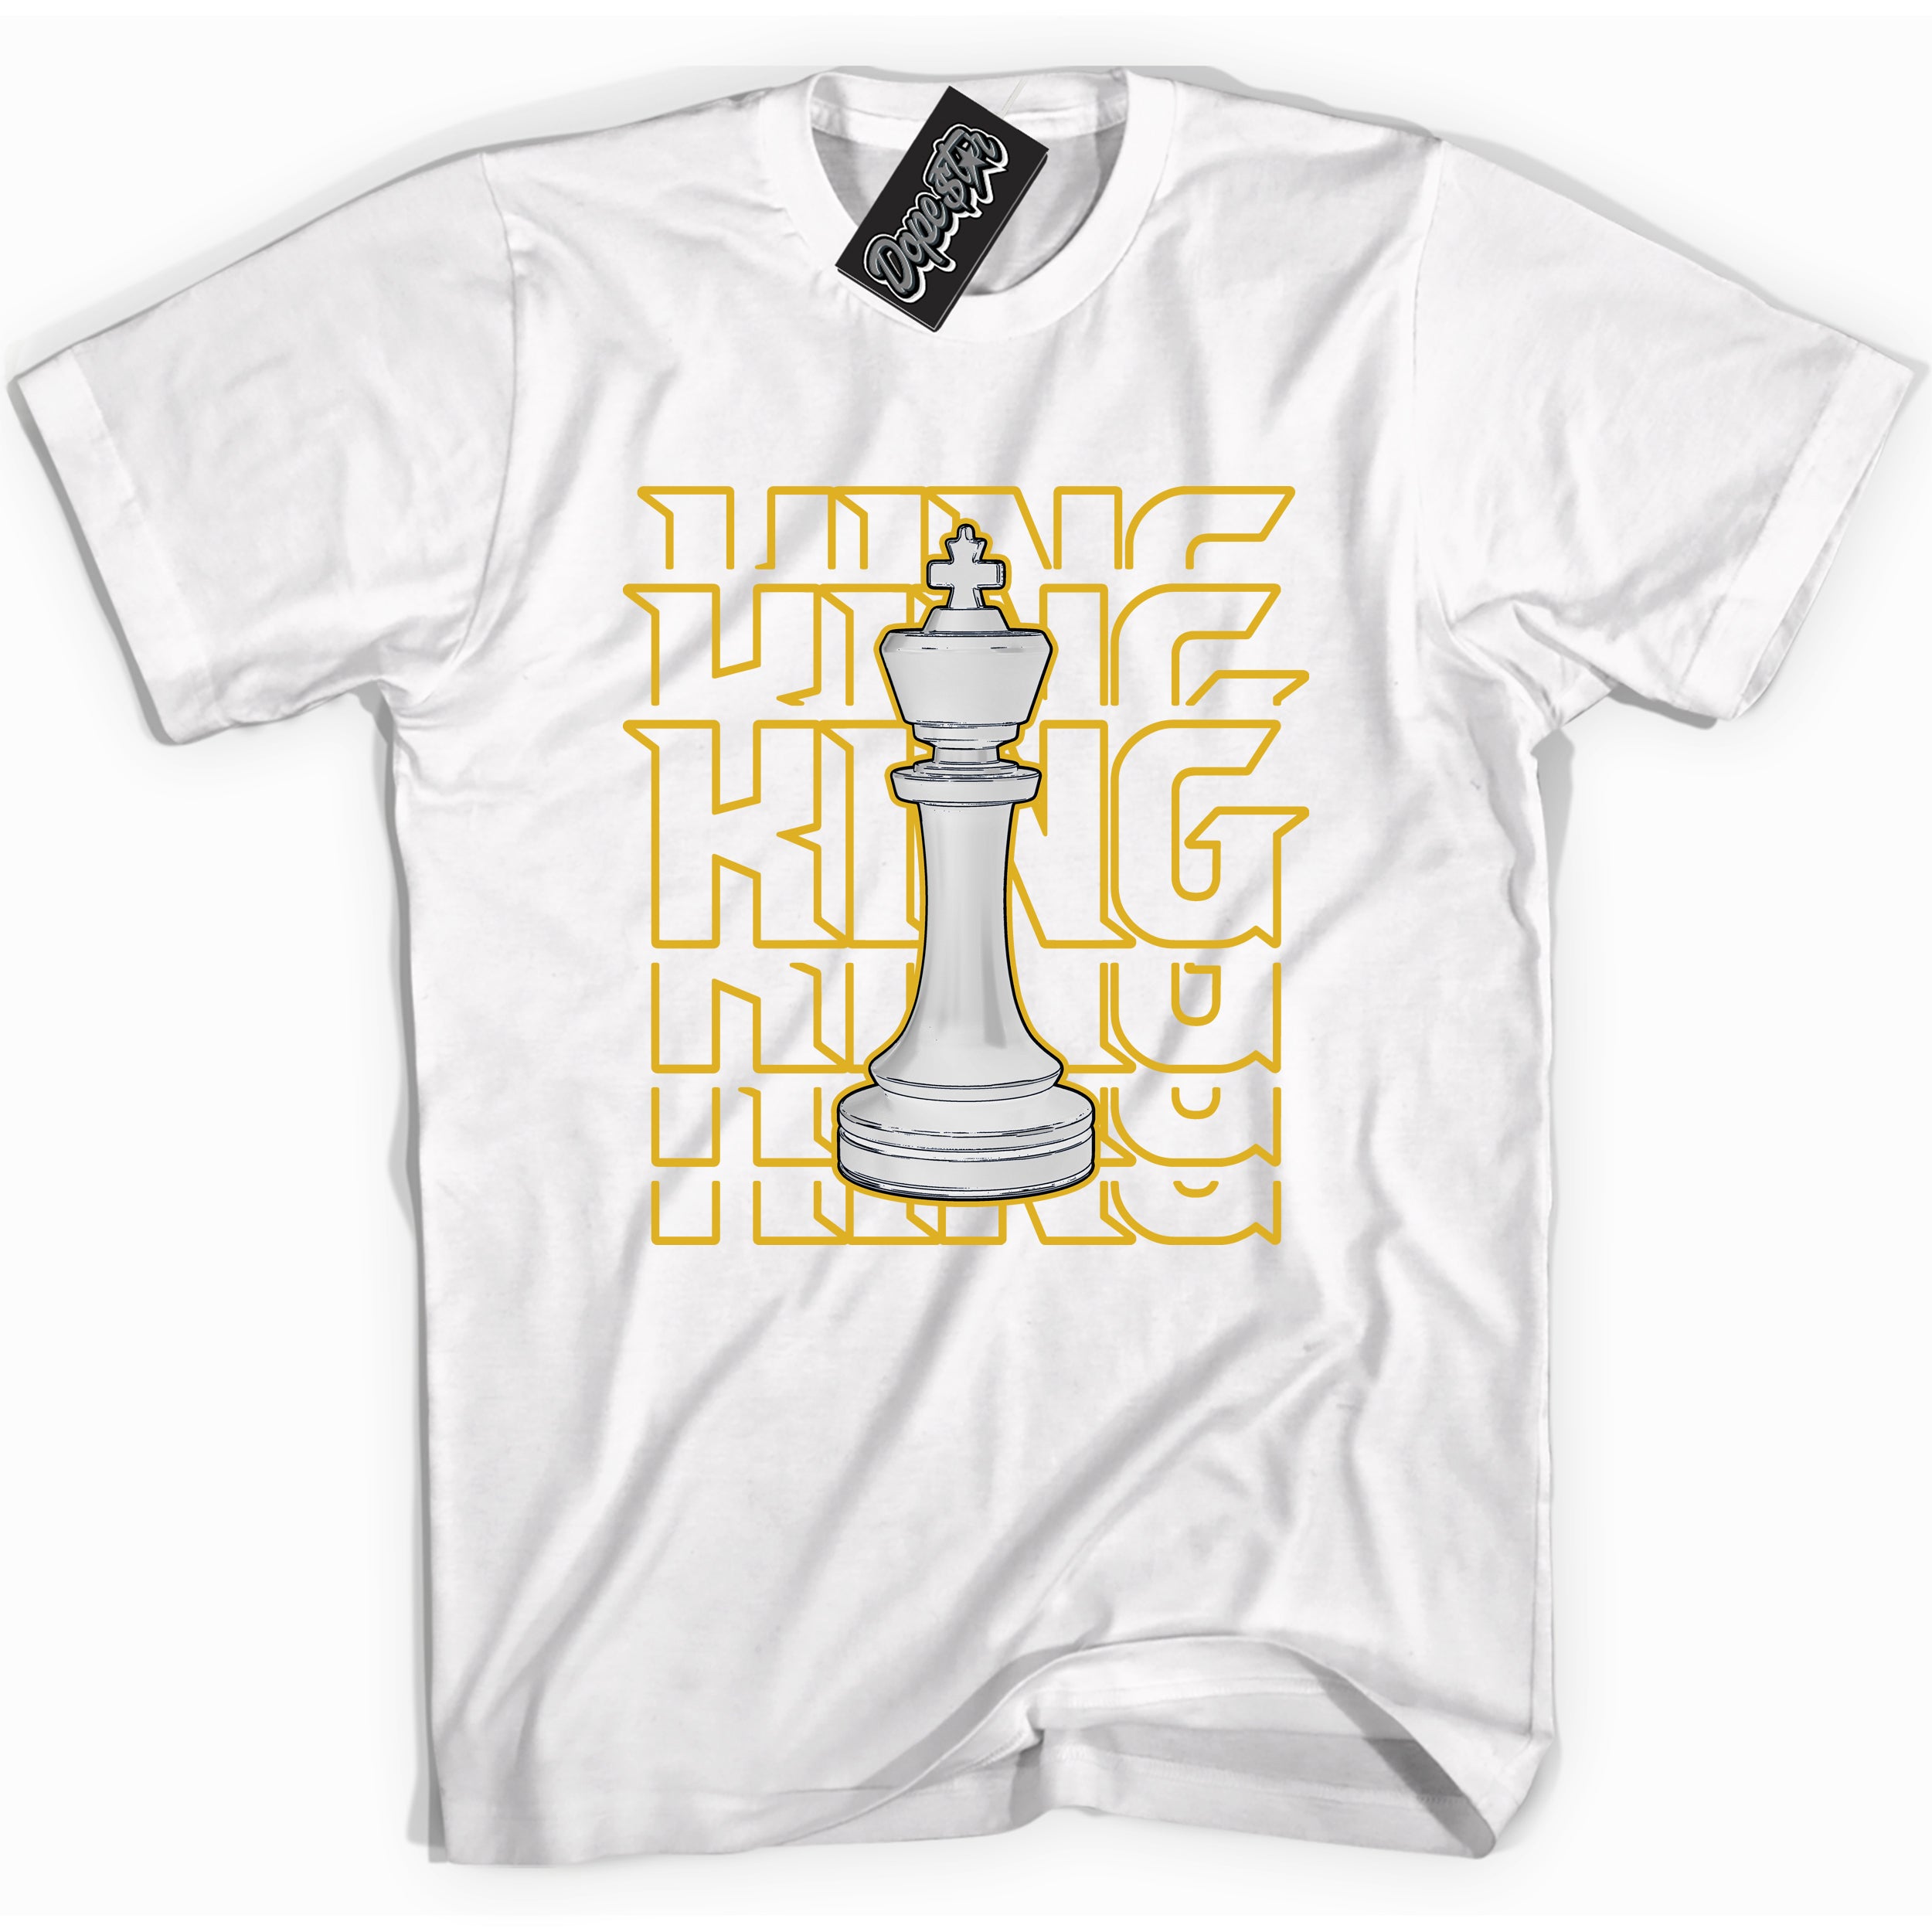 Cool White Shirt with “ King Chess” design that perfectly matches Yellow Ochre 6s Sneakers.